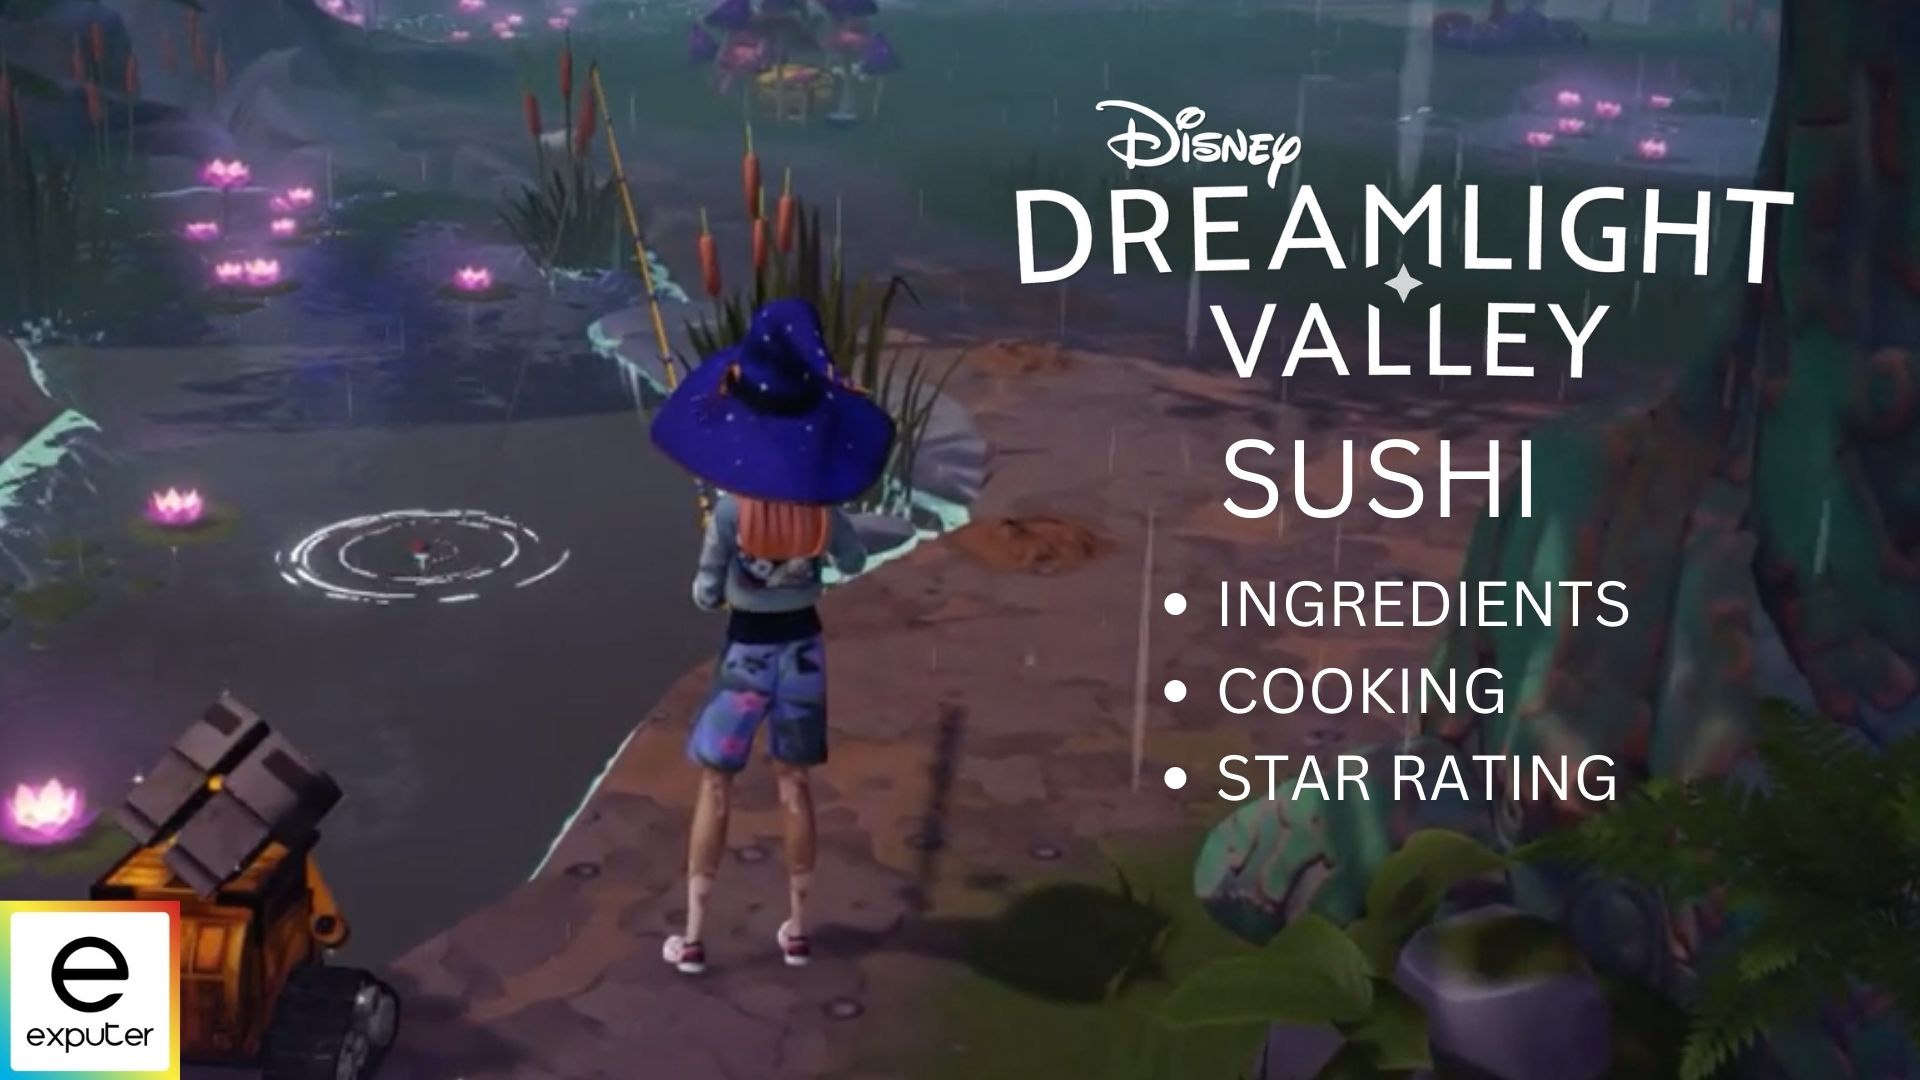 How To Make Disney Dreamlight Valley Sushi